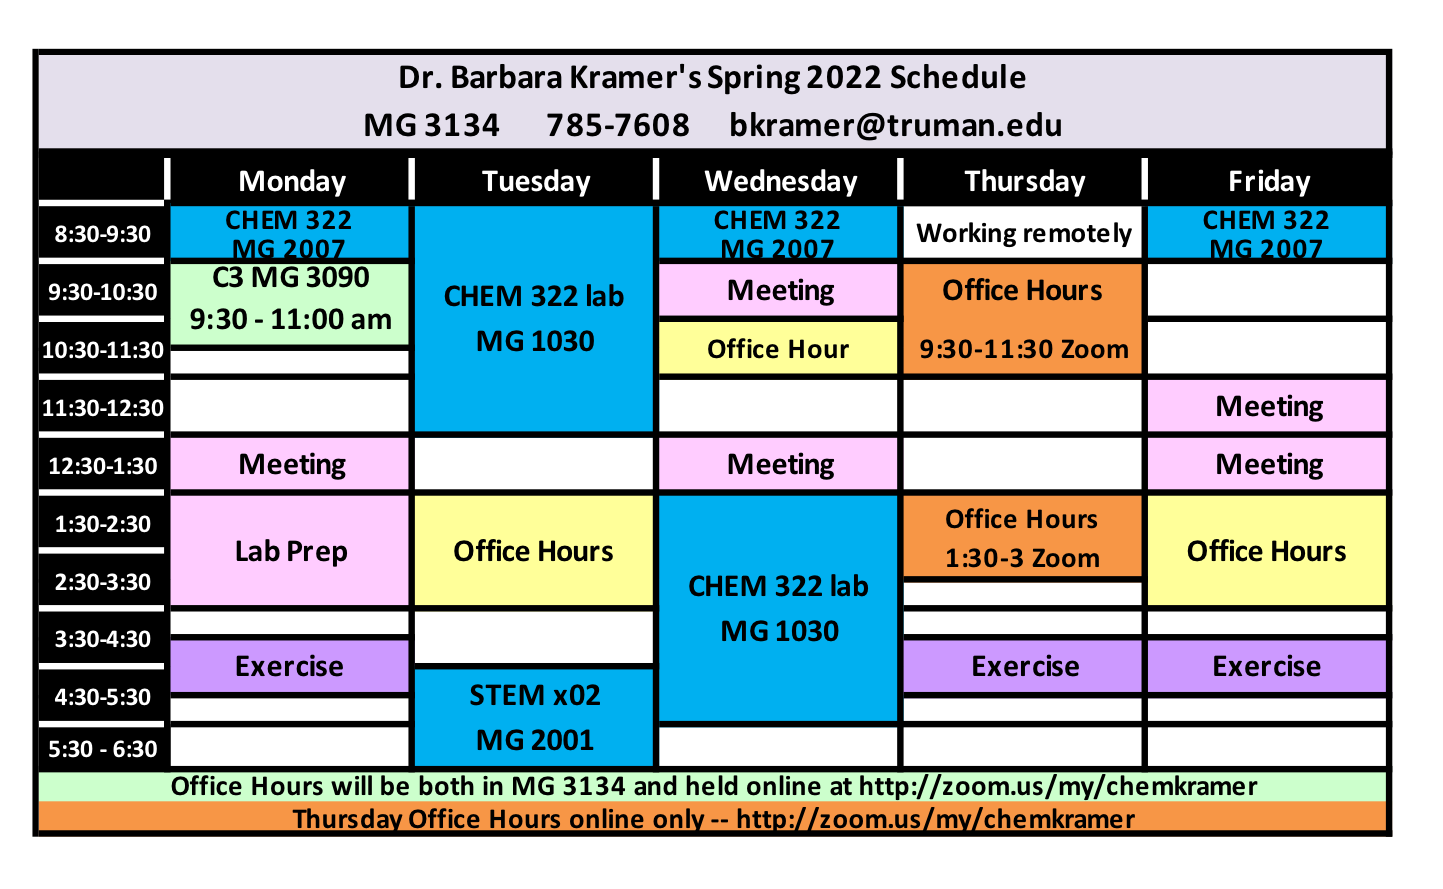 Weekly schedule with office hours as written above